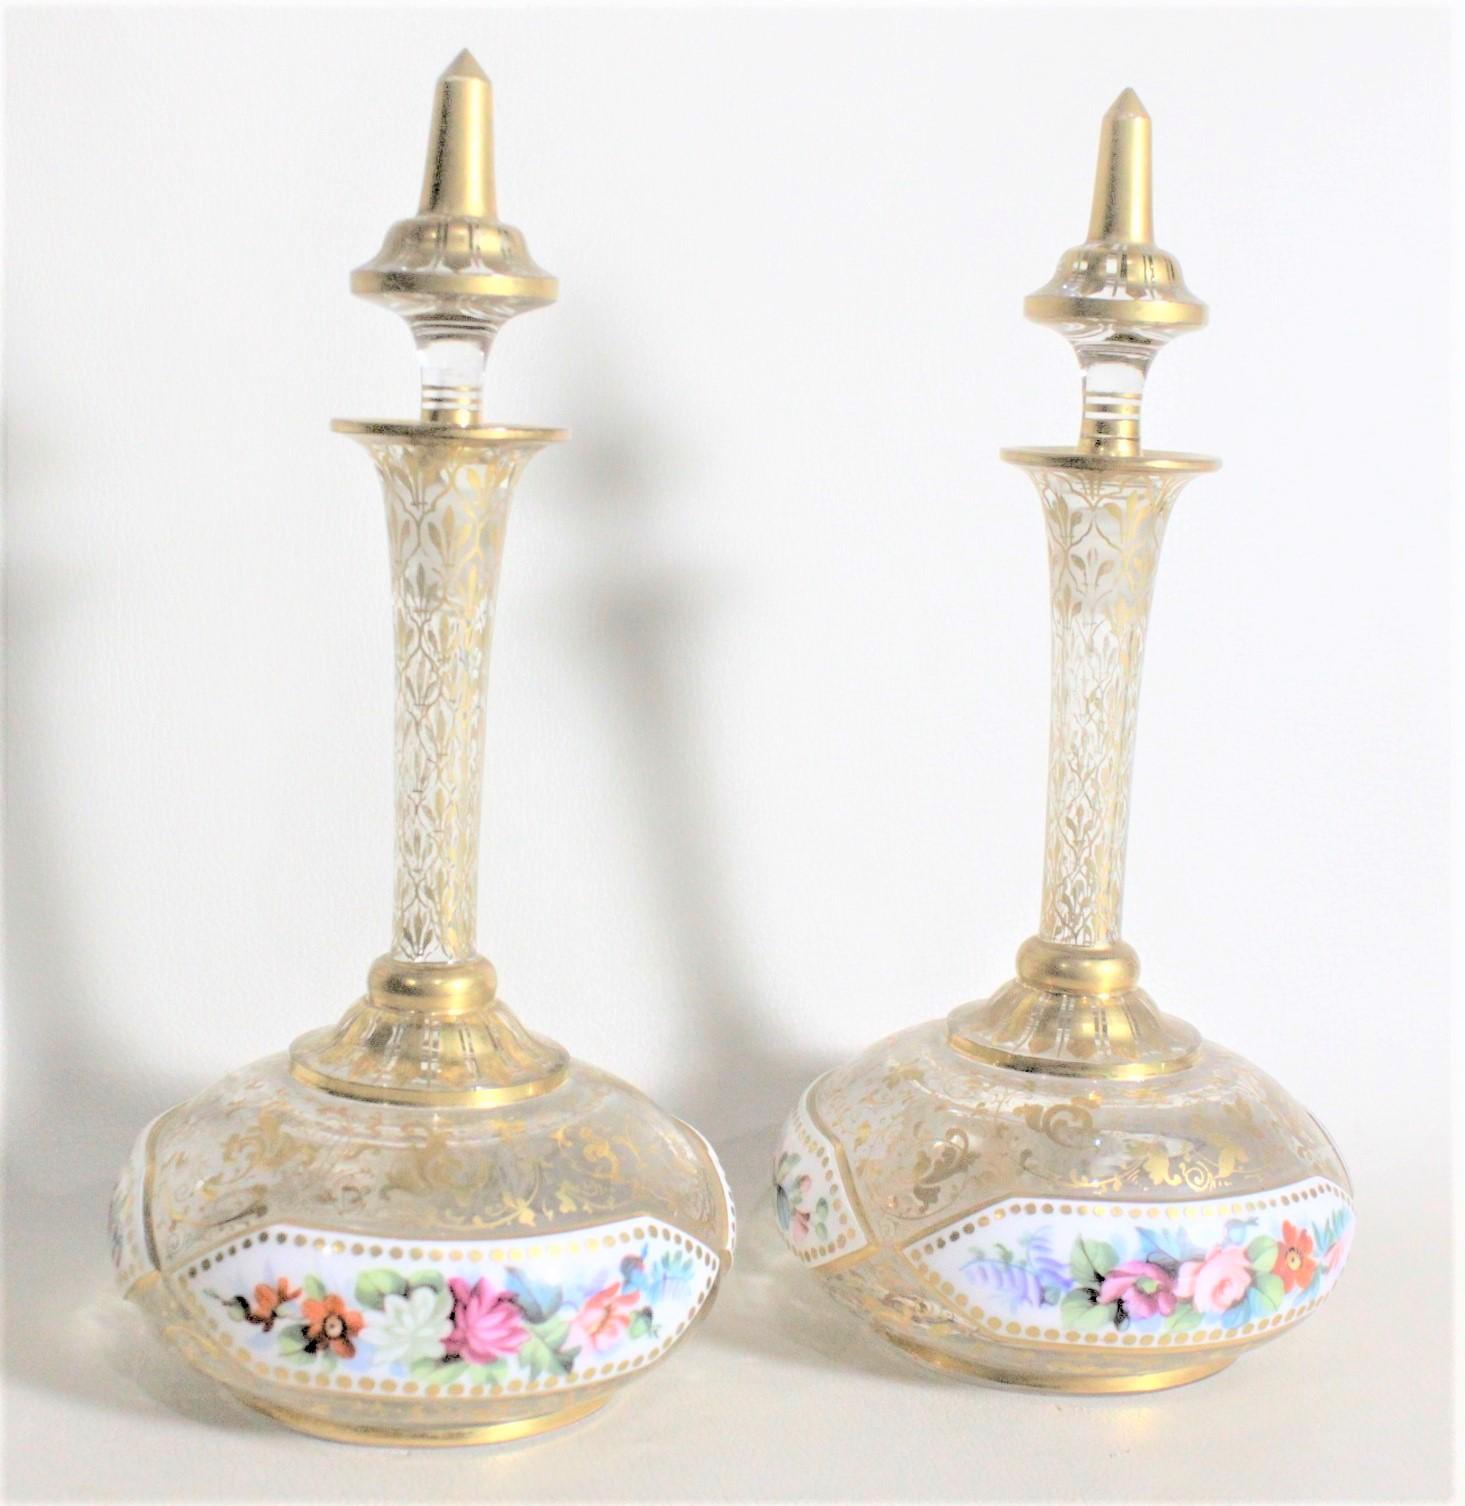 Pair of Antique Bohemian Perfume or Scent Bottles with Enamel & Gilt Decoration In Good Condition For Sale In Hamilton, Ontario